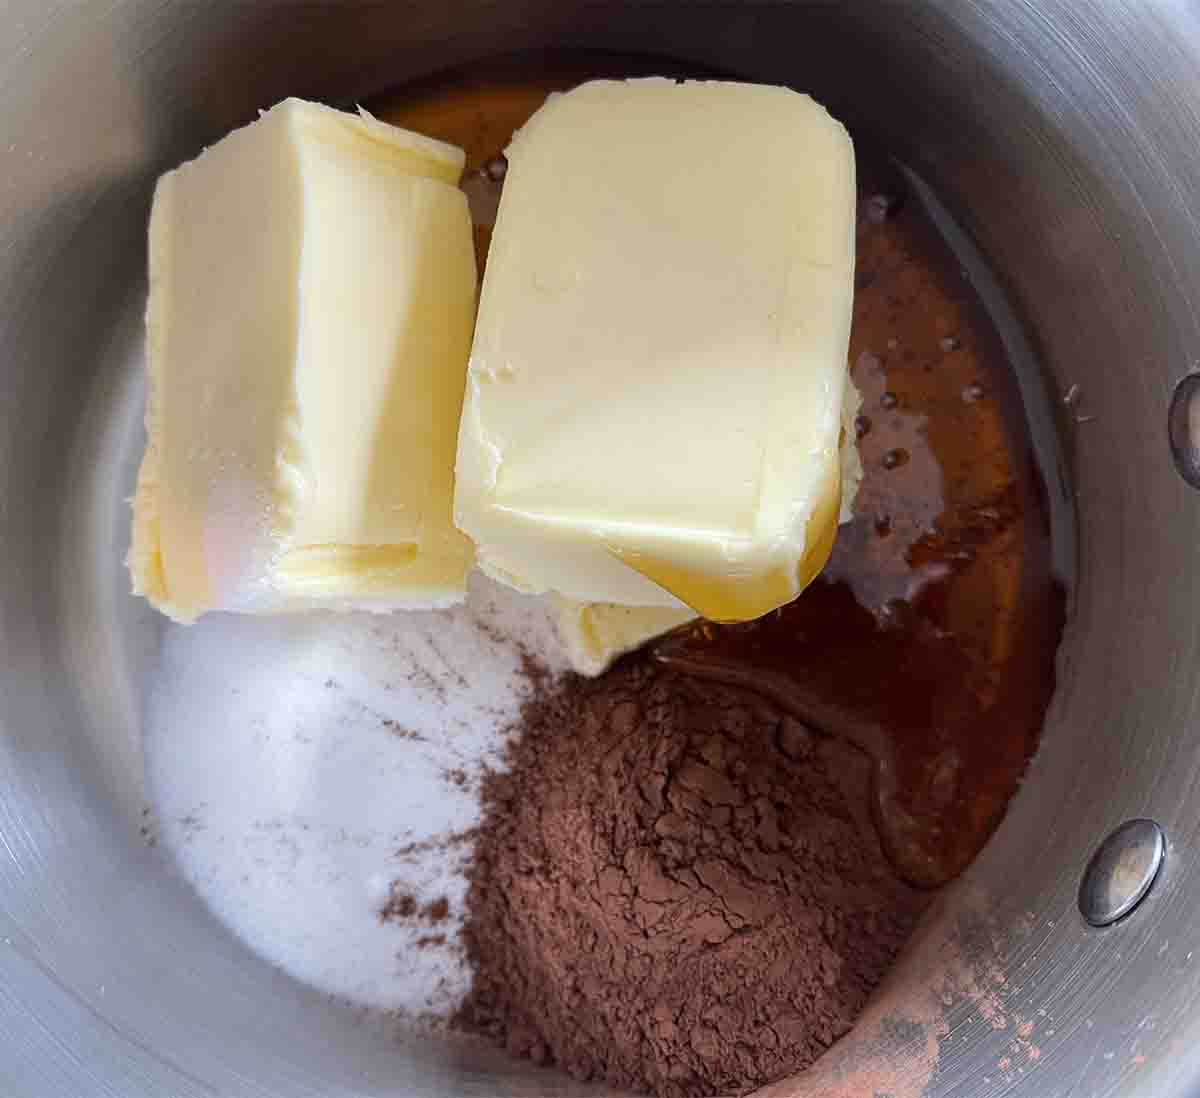 butter, sugar and cocoa in a pan.